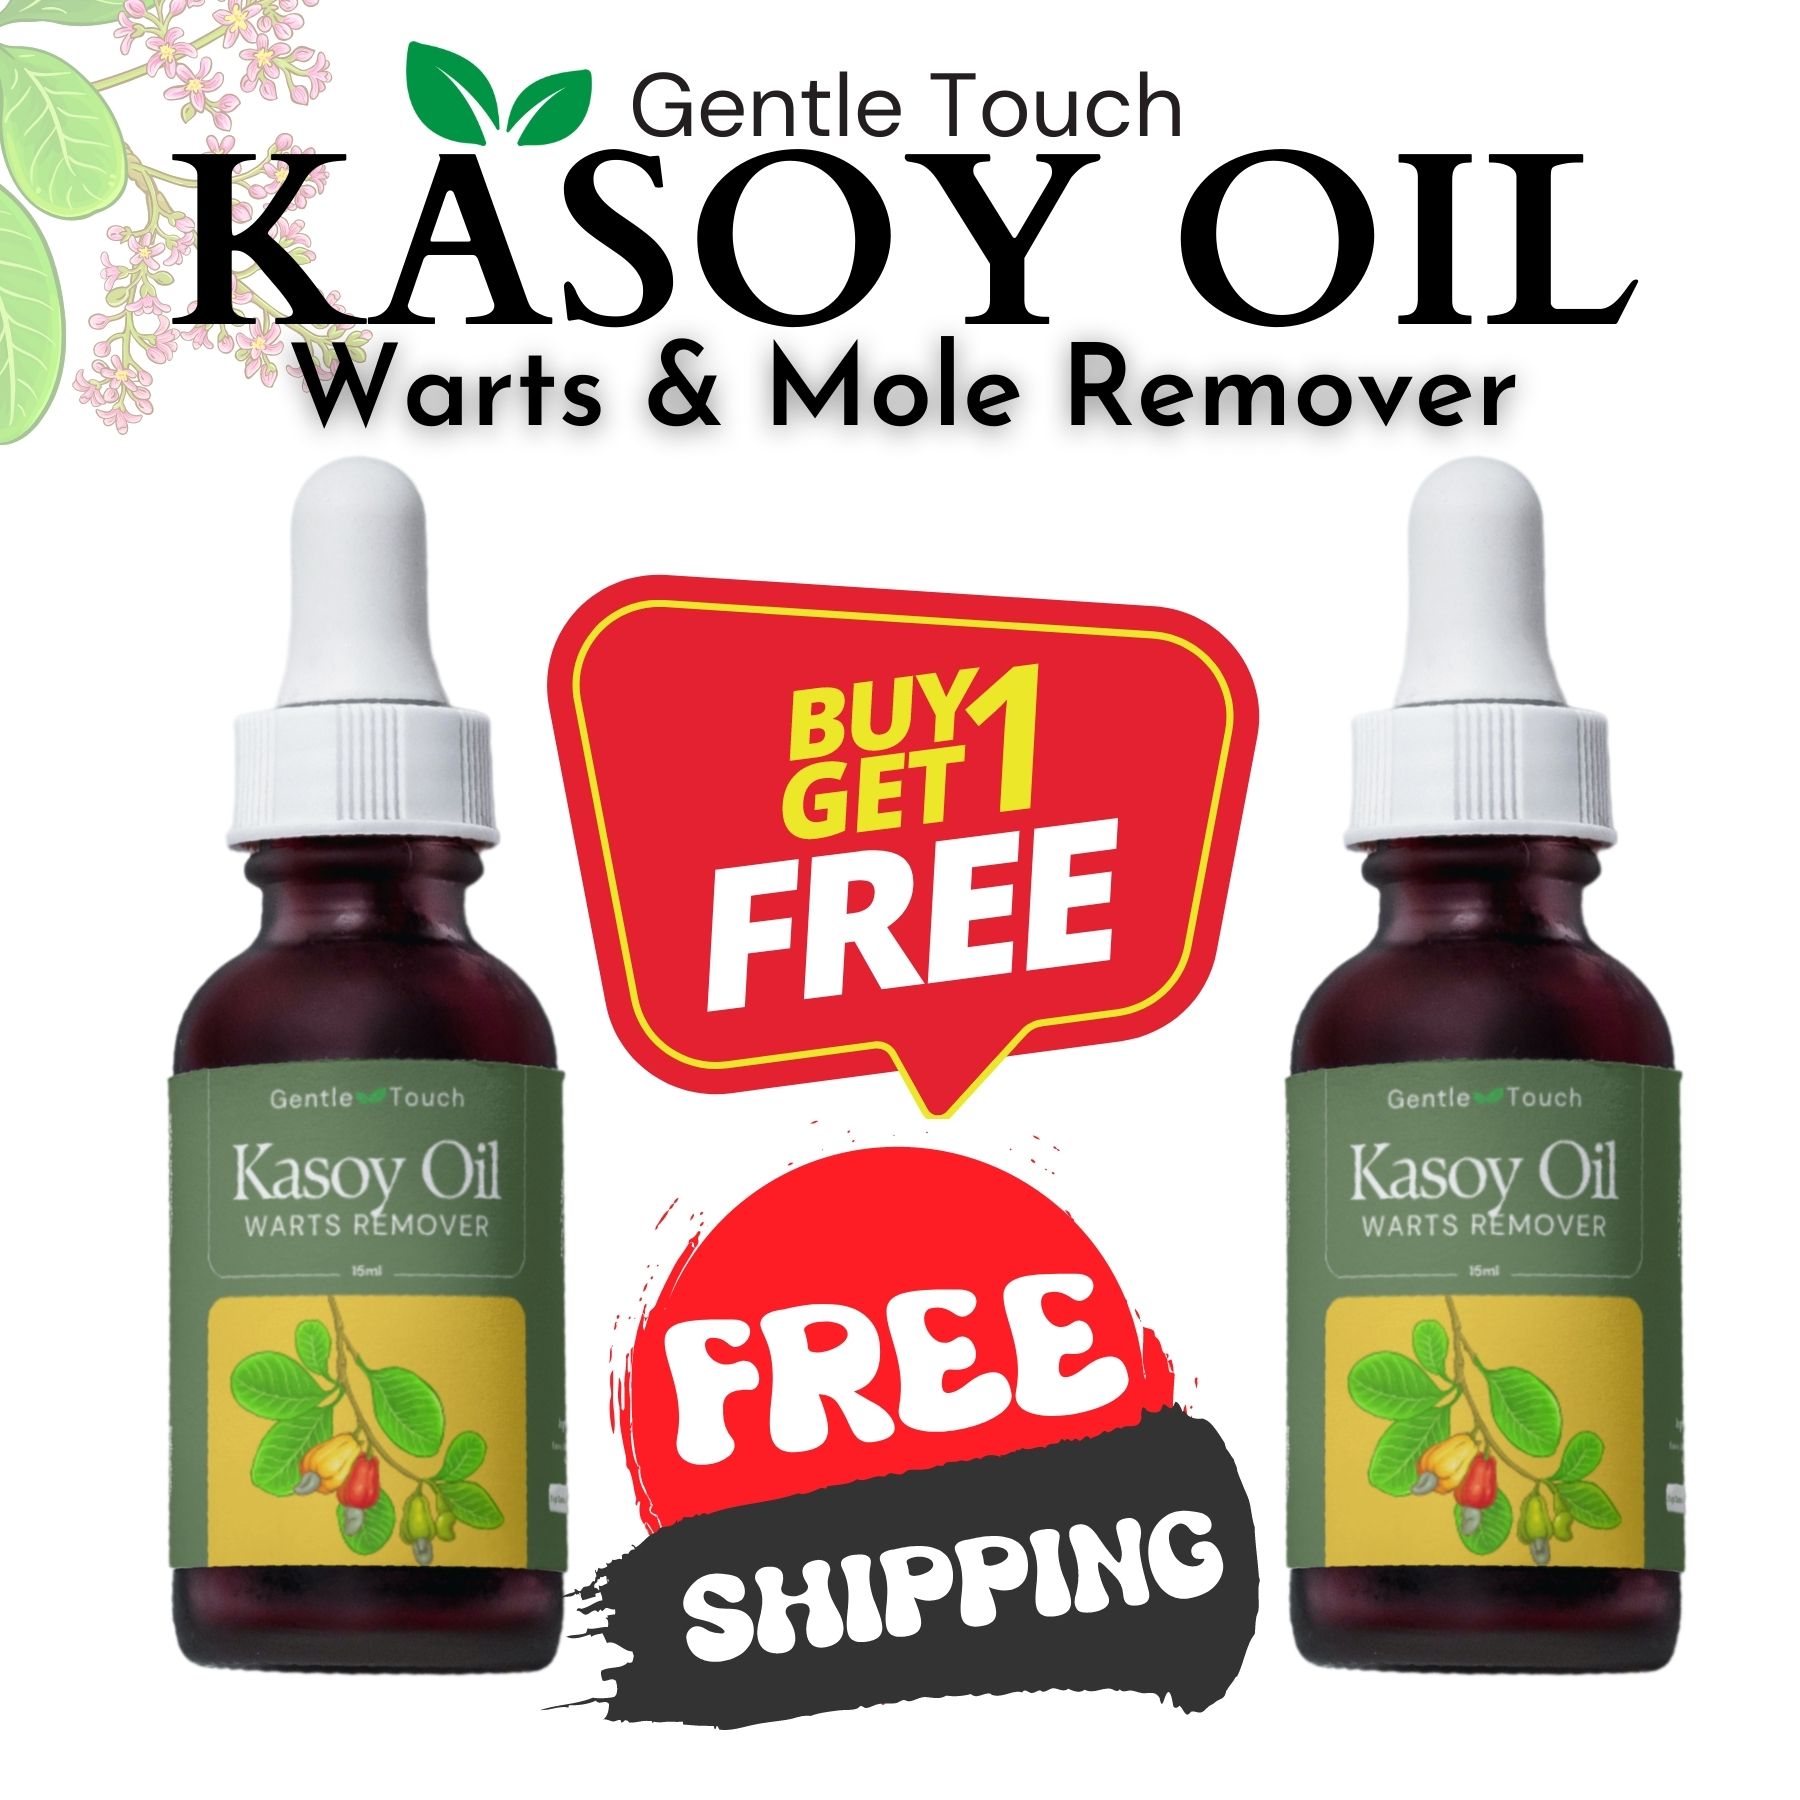 ✓{Gentle Touch} Warts & Mole Remover Original Kasoy Oil Extract